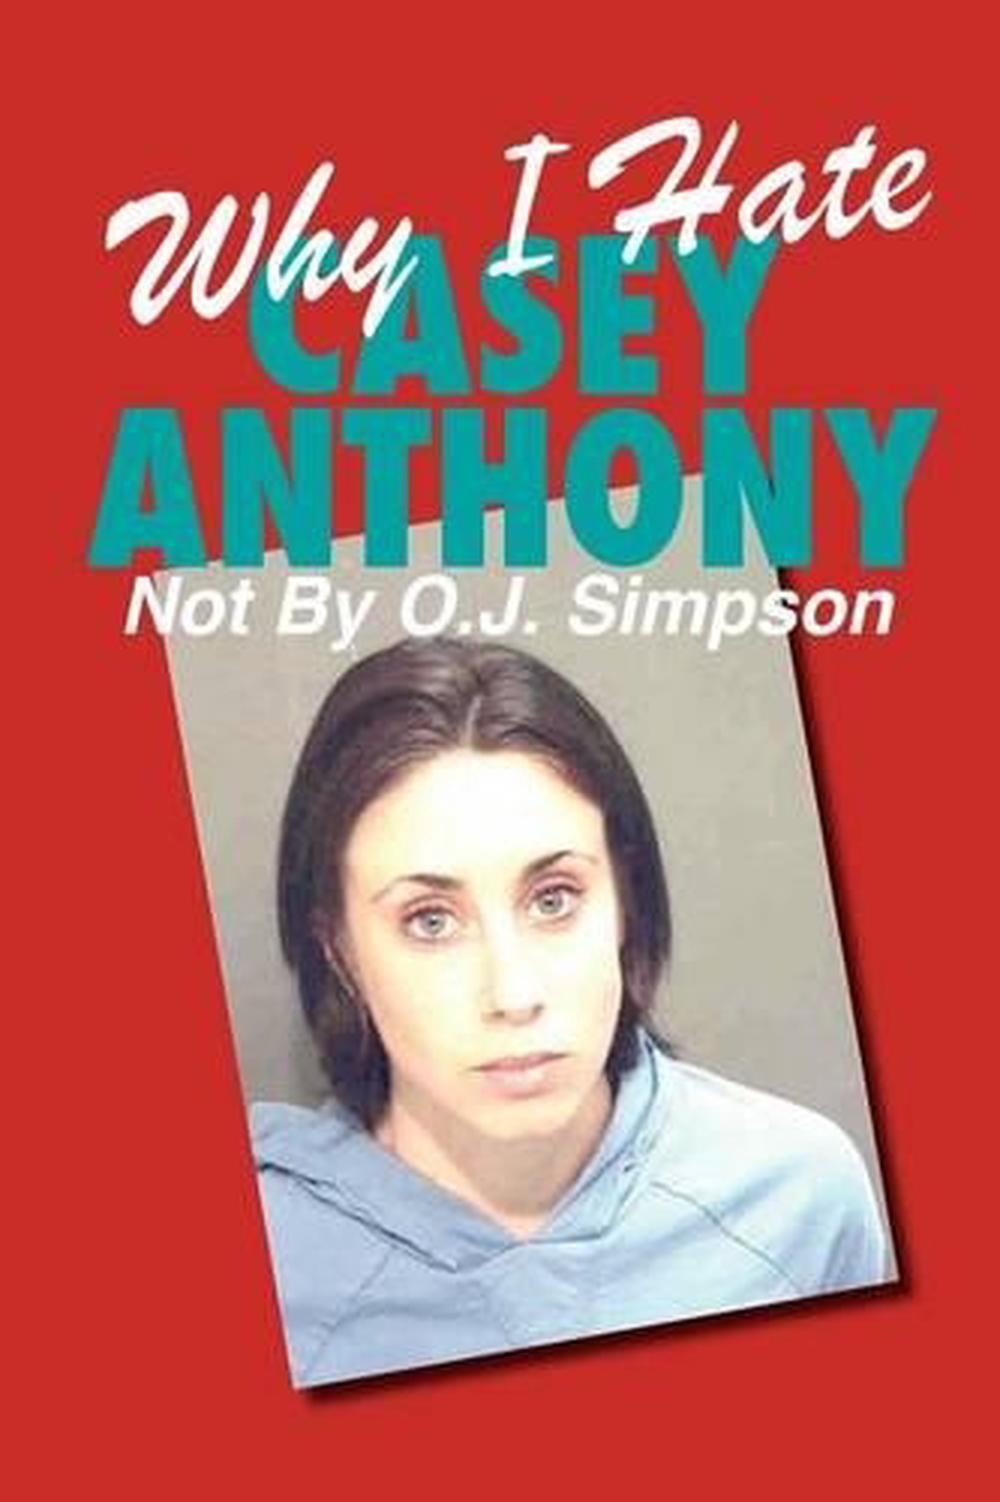 Why I Hate Casey Anthony Not By Oj Simpson By A Household Name